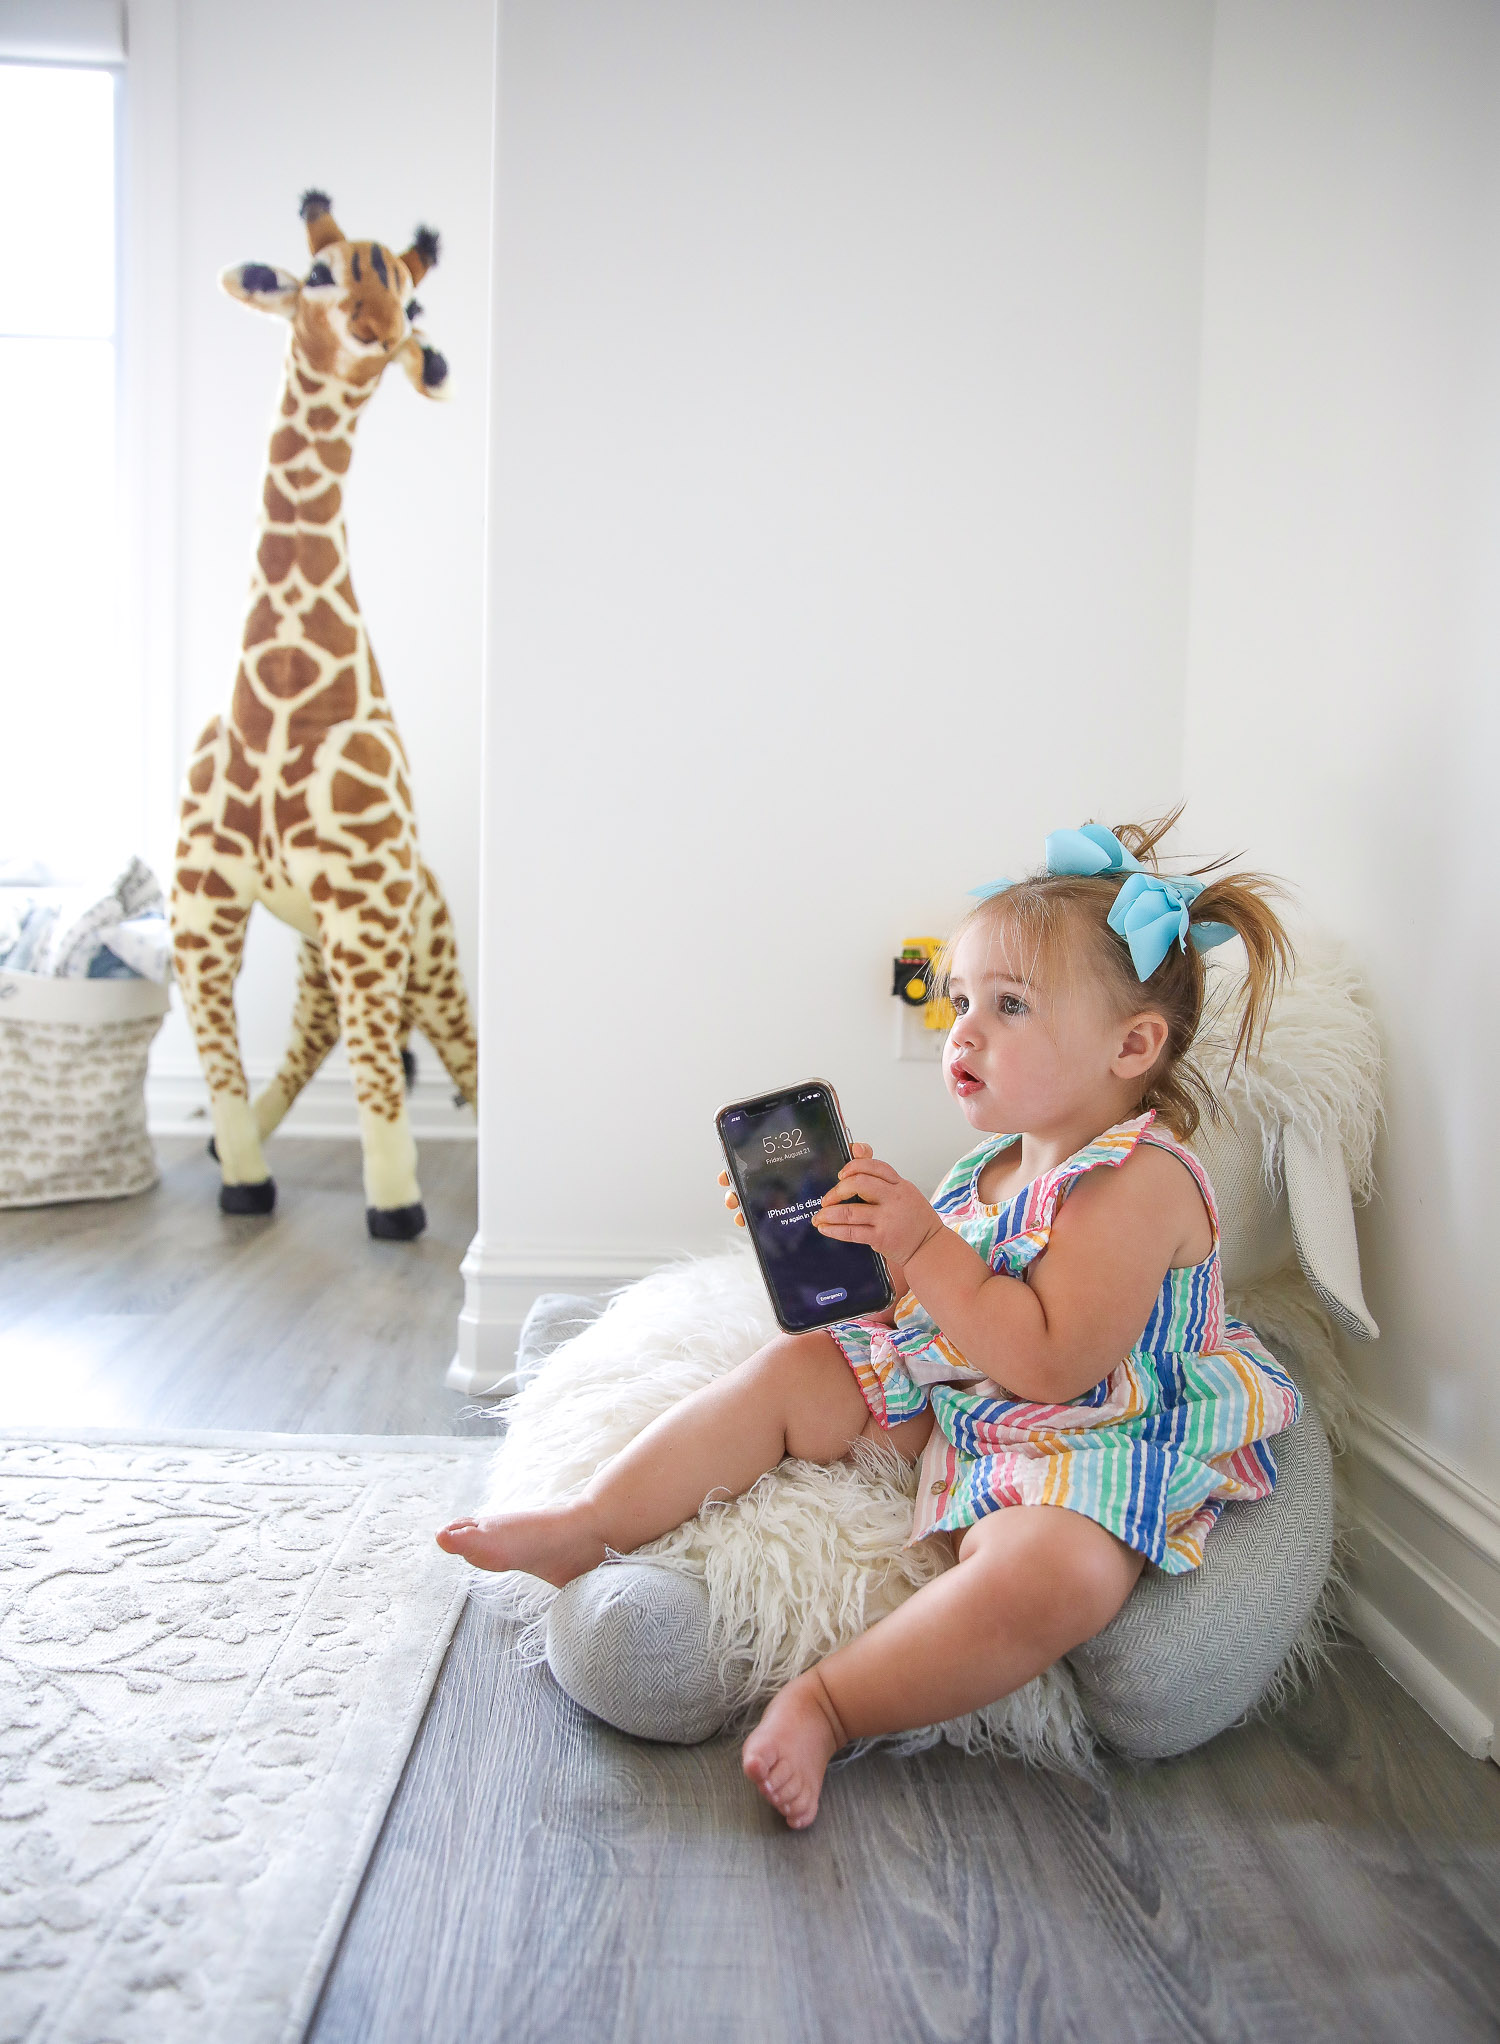 walmart kids home organization must haves, playroom organization ideas, emily gemma, the sweetest thing blog | Playroom Organization by popular US life and style blog, The Sweetest Thing: image of a little girl sitting on a floor pillow and holding a smartphone. 